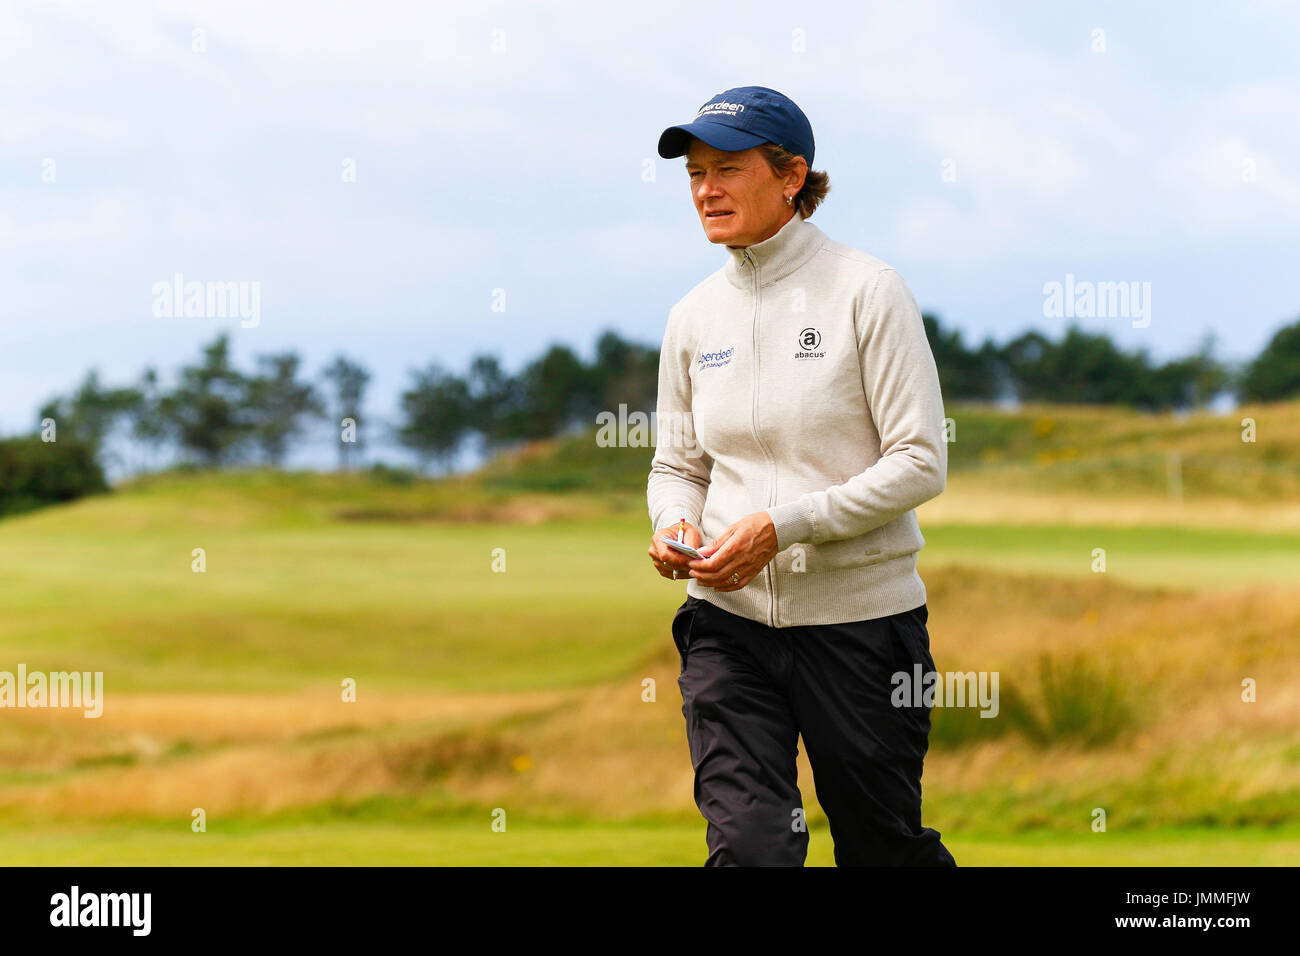 Irvine, Scotland, UK. 28th July, 2017. On the second day of the Scottish Open, players were hoping to play well and make the cut. After the calm weather on the first day some players were finding the conditions of strong winds and links style golf difficult while others played better than on the first round. Credit: Findlay/Alamy Live News Stock Photo